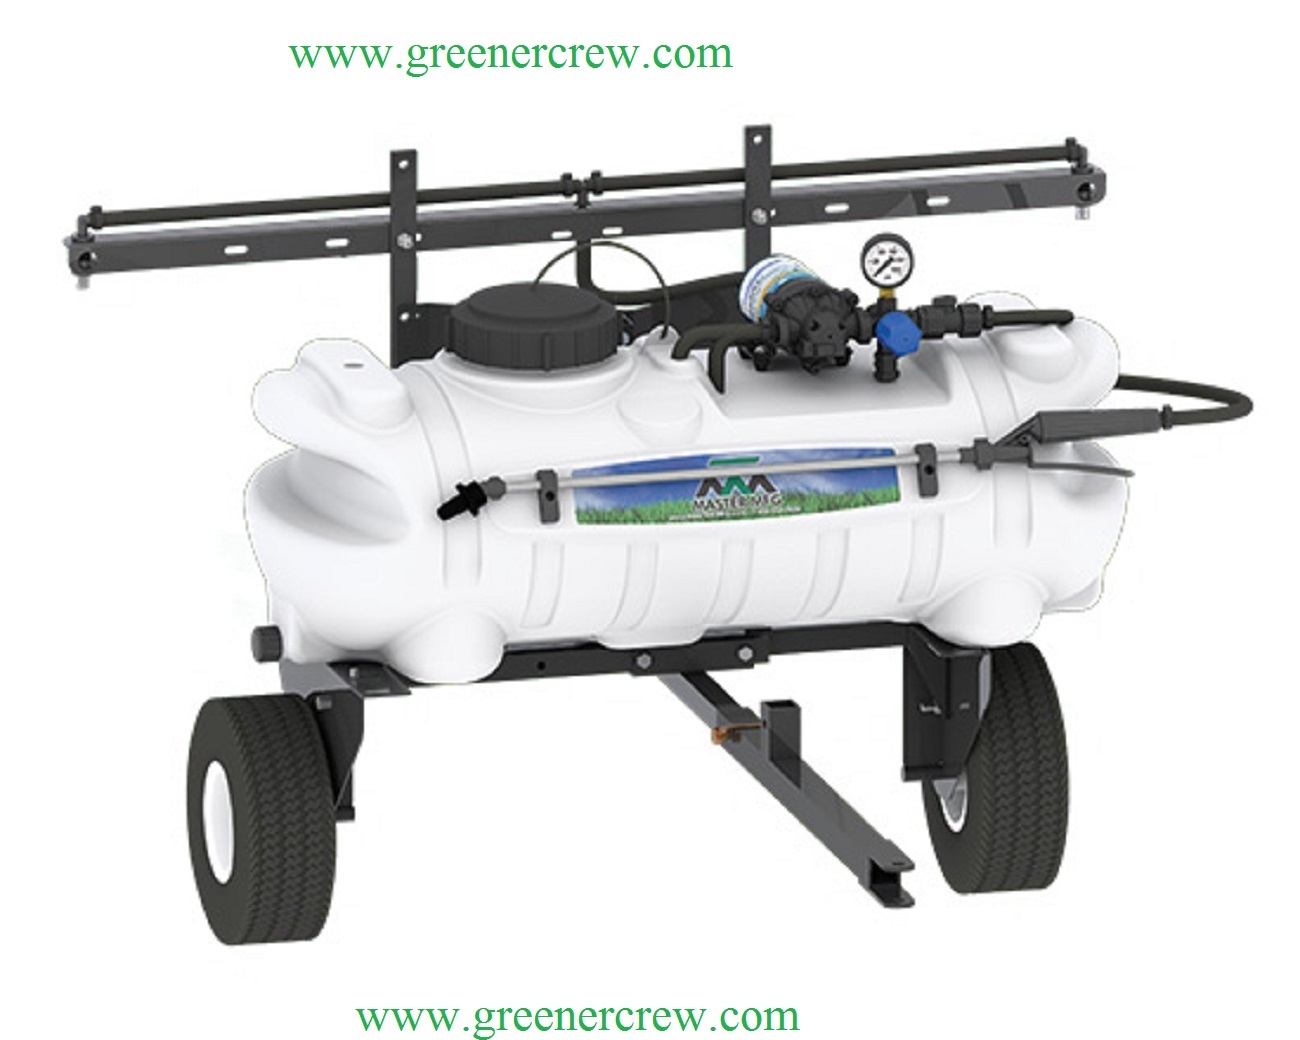 Agriculture/Turf Trailer Sprayer 15 Gallon with 84" Boom Spray Coverage - $369.03